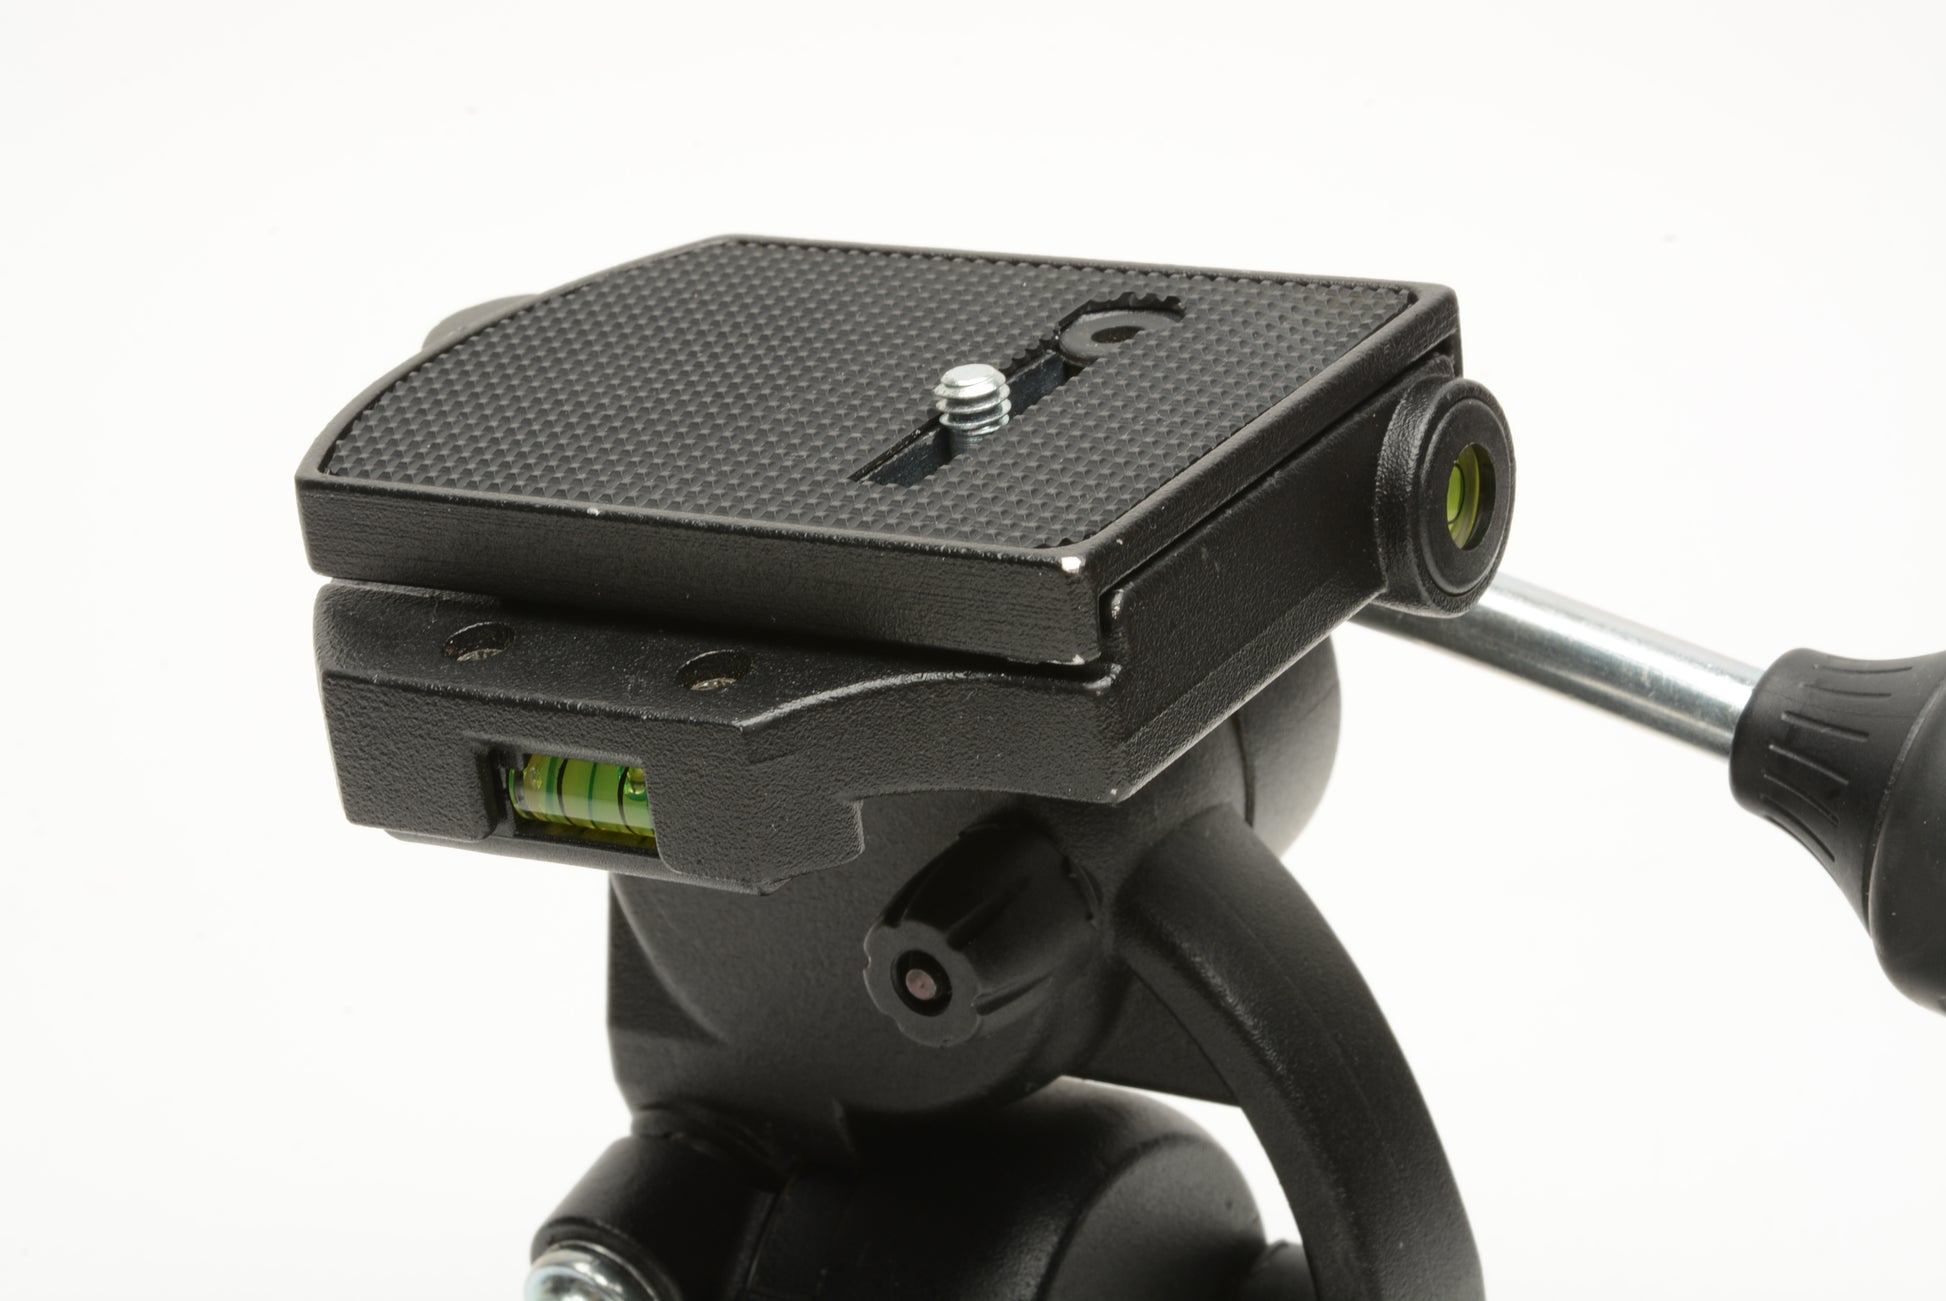 3-Way Pan/Tilt Tripod Head with RC4 Quick Release Plate